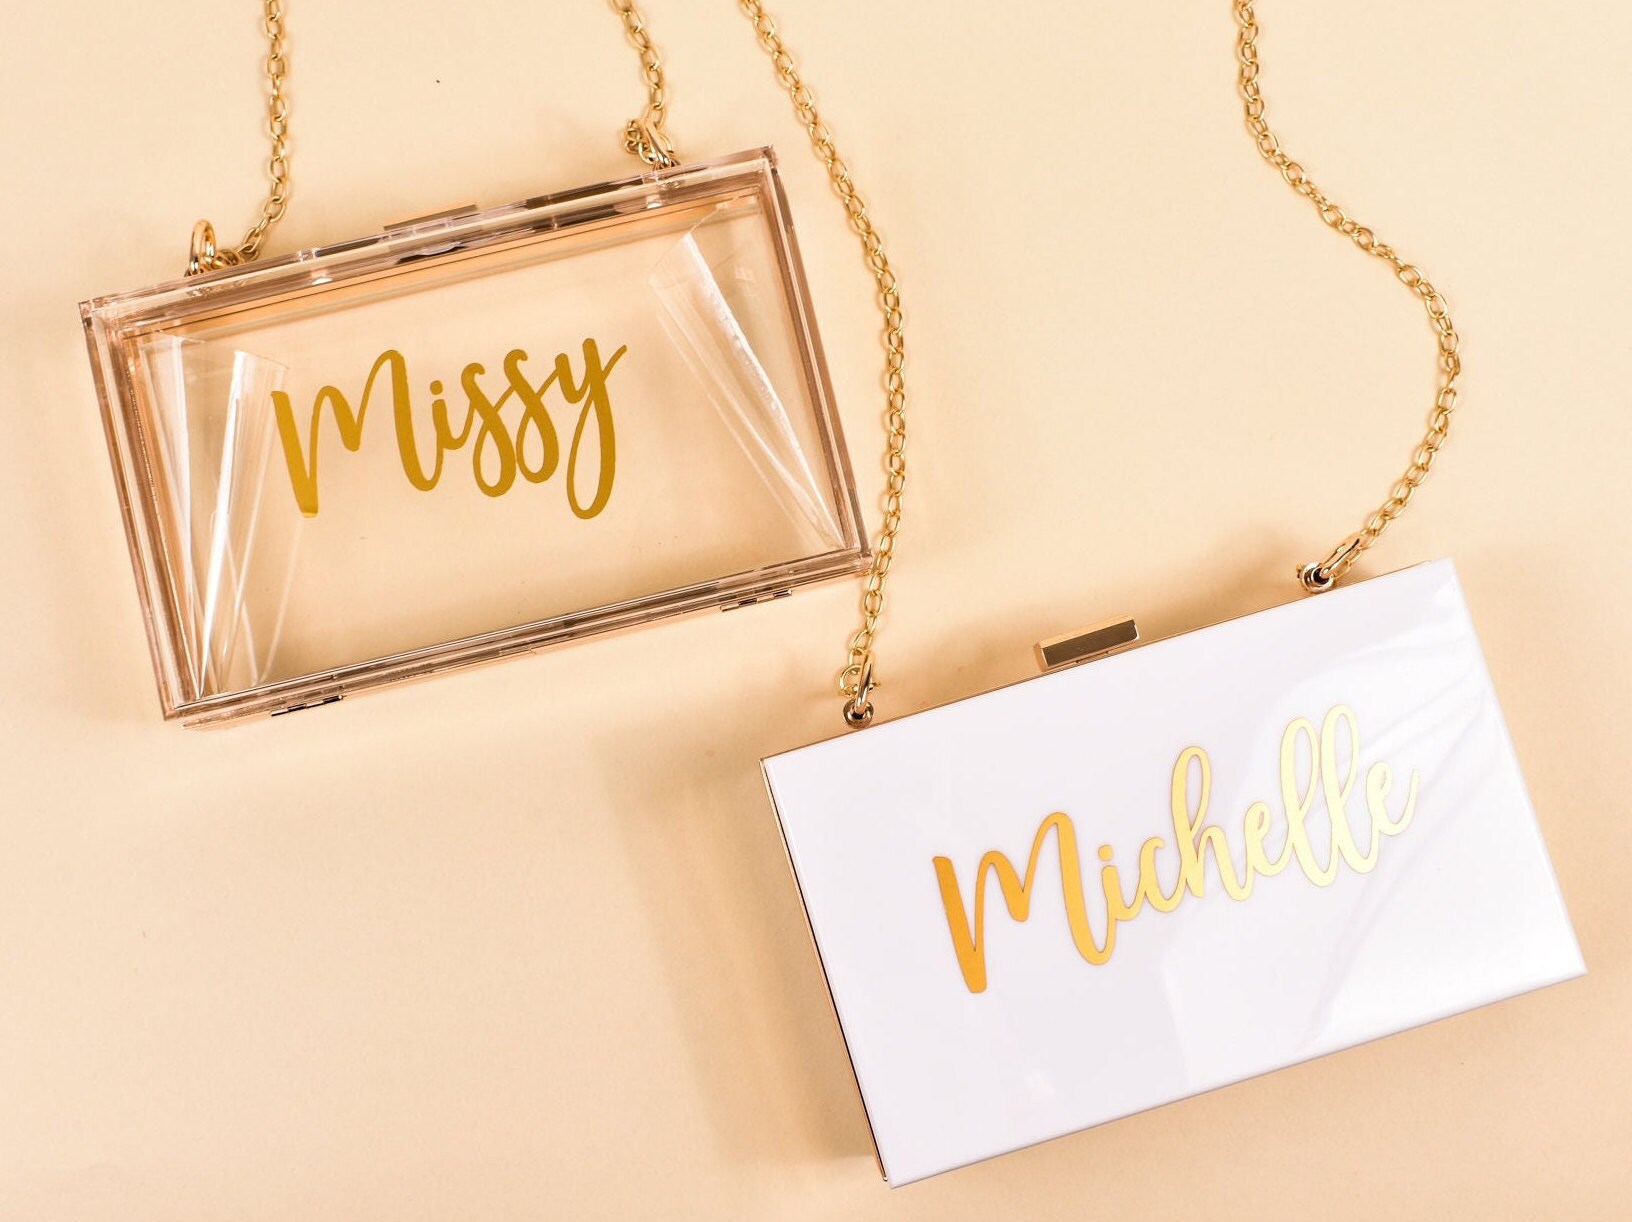 Personalized Acrylic Clutch for Bride | Bride Purse | Bridesmaid Gifts | Custom Wedding Gifts | Bachelorette Party Favors